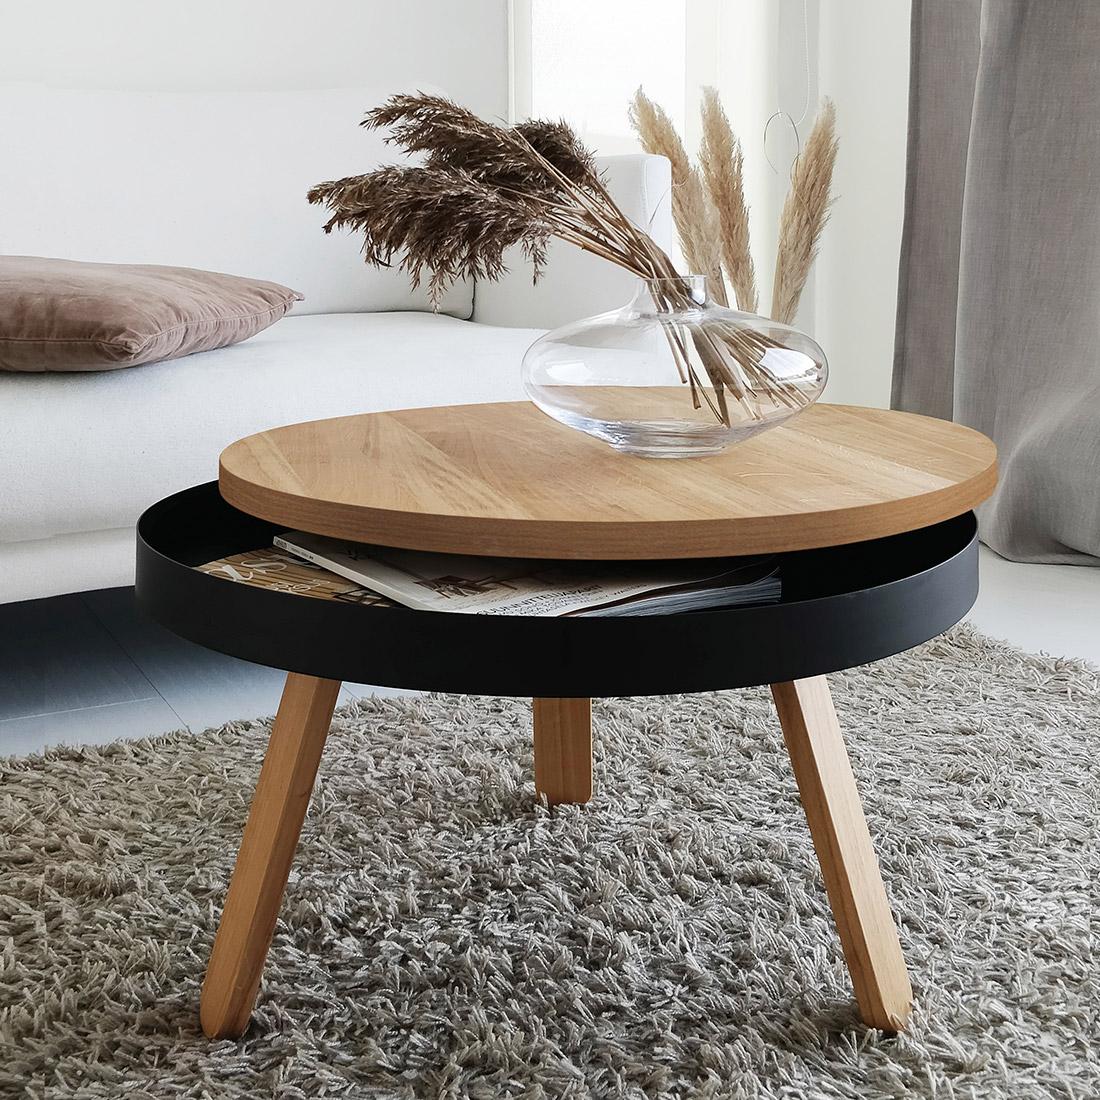 A round coffee table that combines tradition and modernity, adapting to the dynamics of each home space.

The medium-sized member of the Batea family is not just a wood side table, it has extra functionality, a small storage space where you can